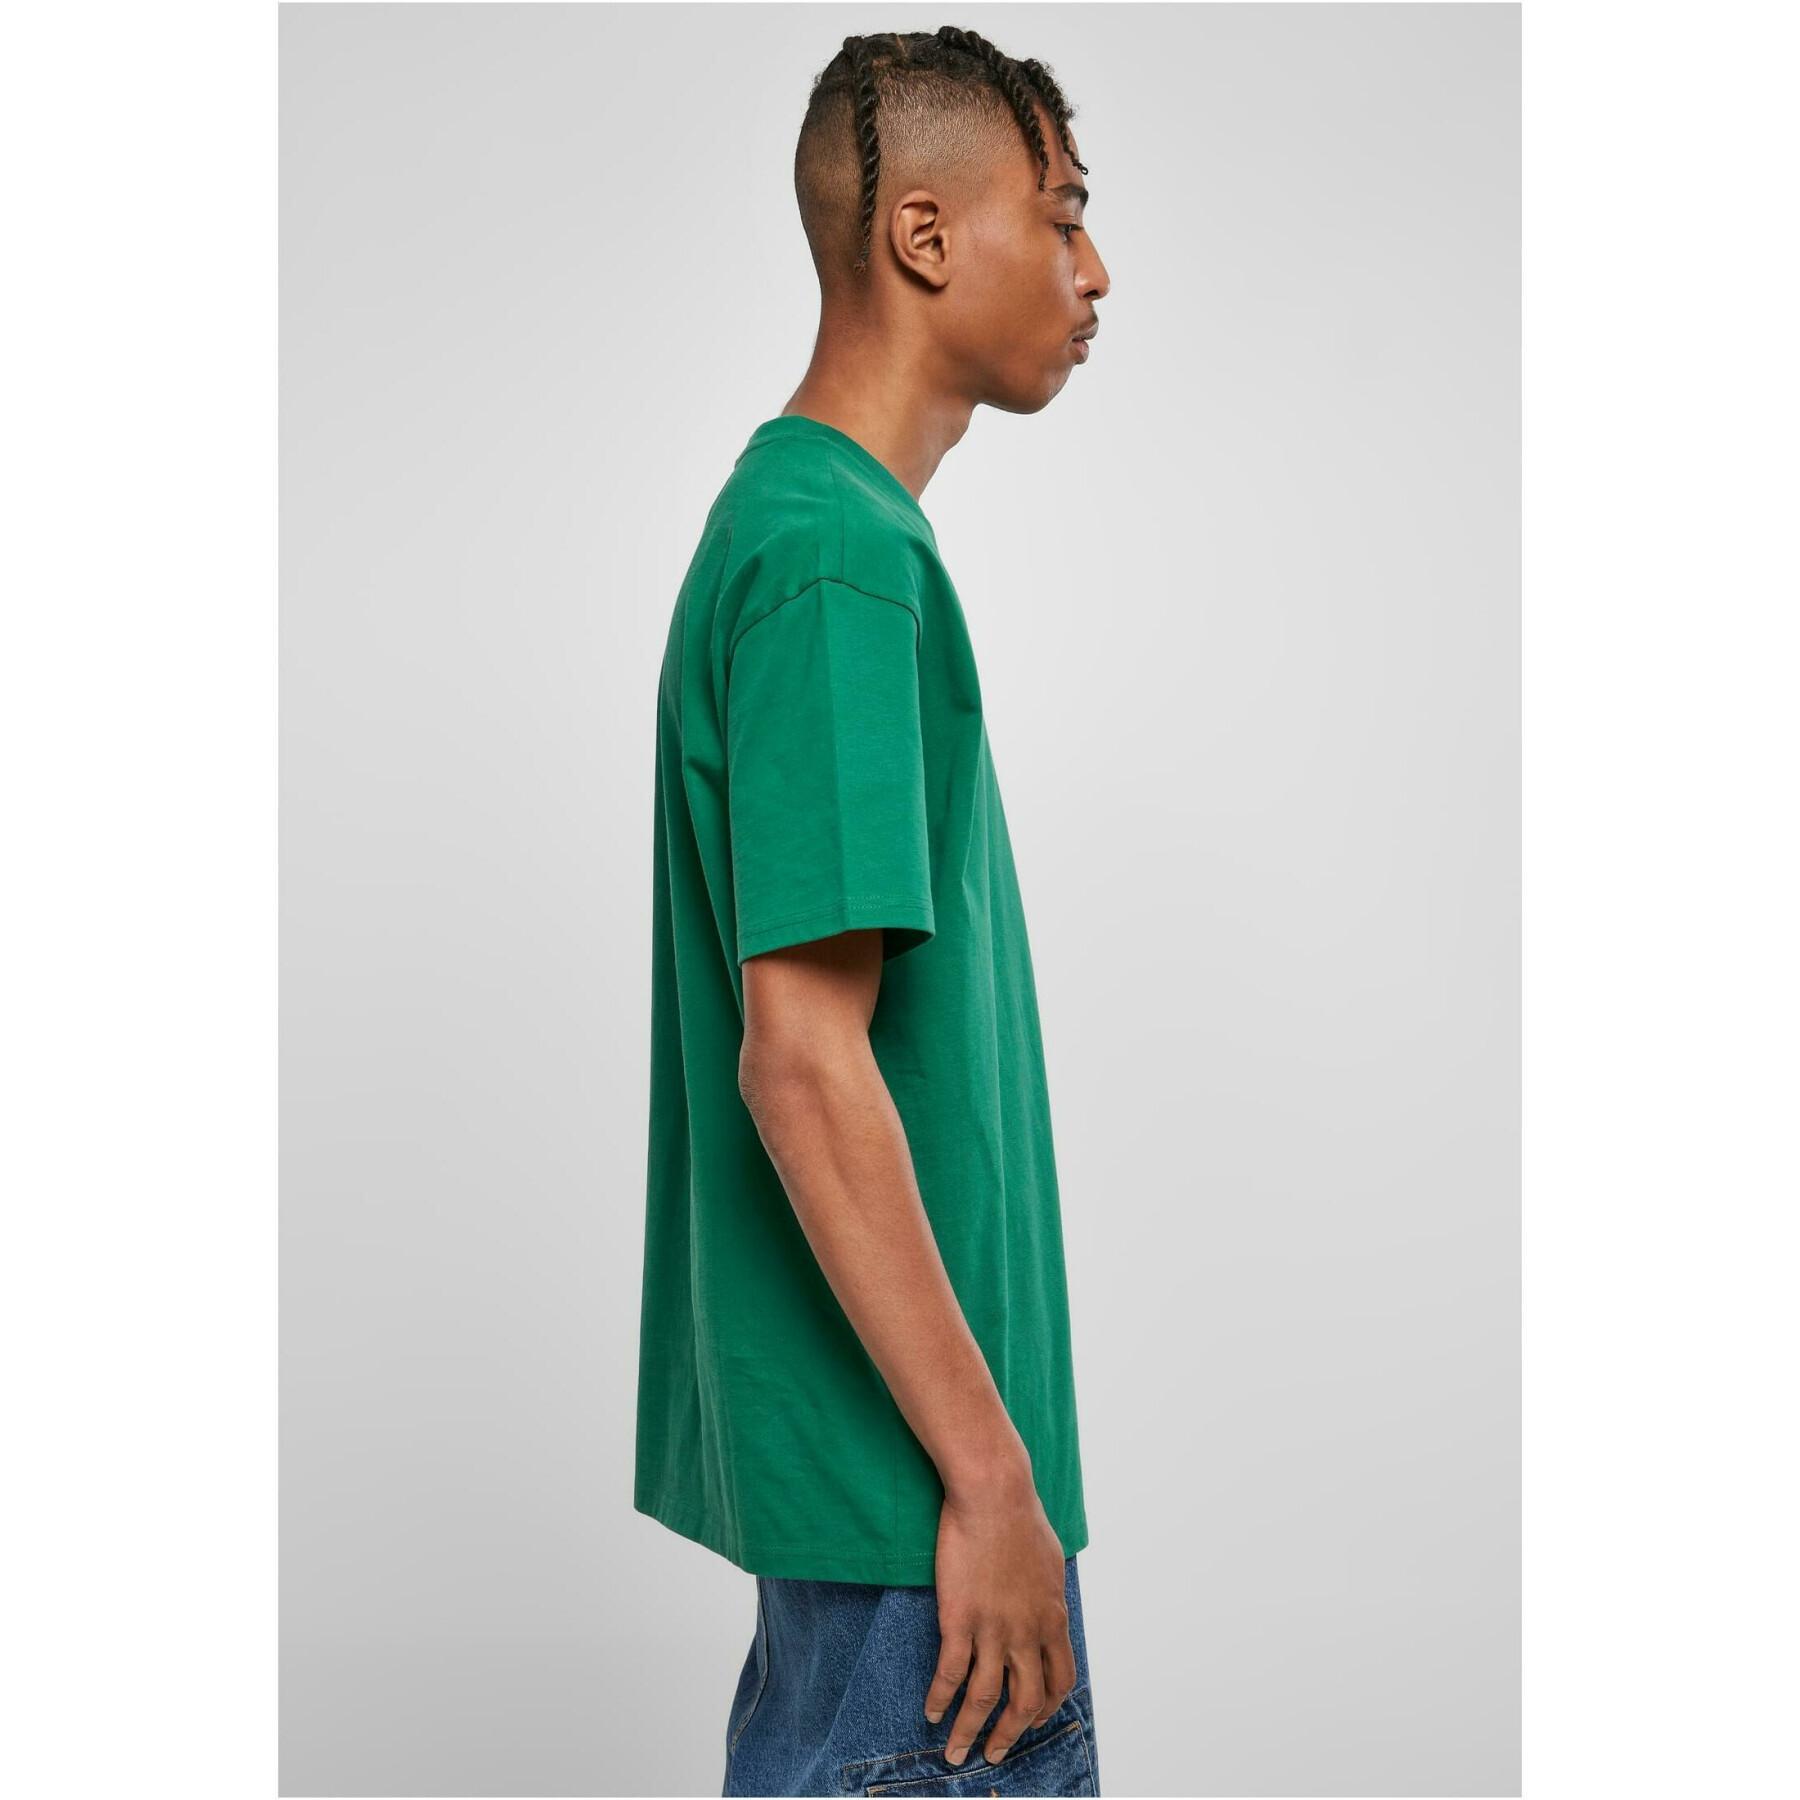 T-shirt manches courtes Urban Classics Heavy Oversized